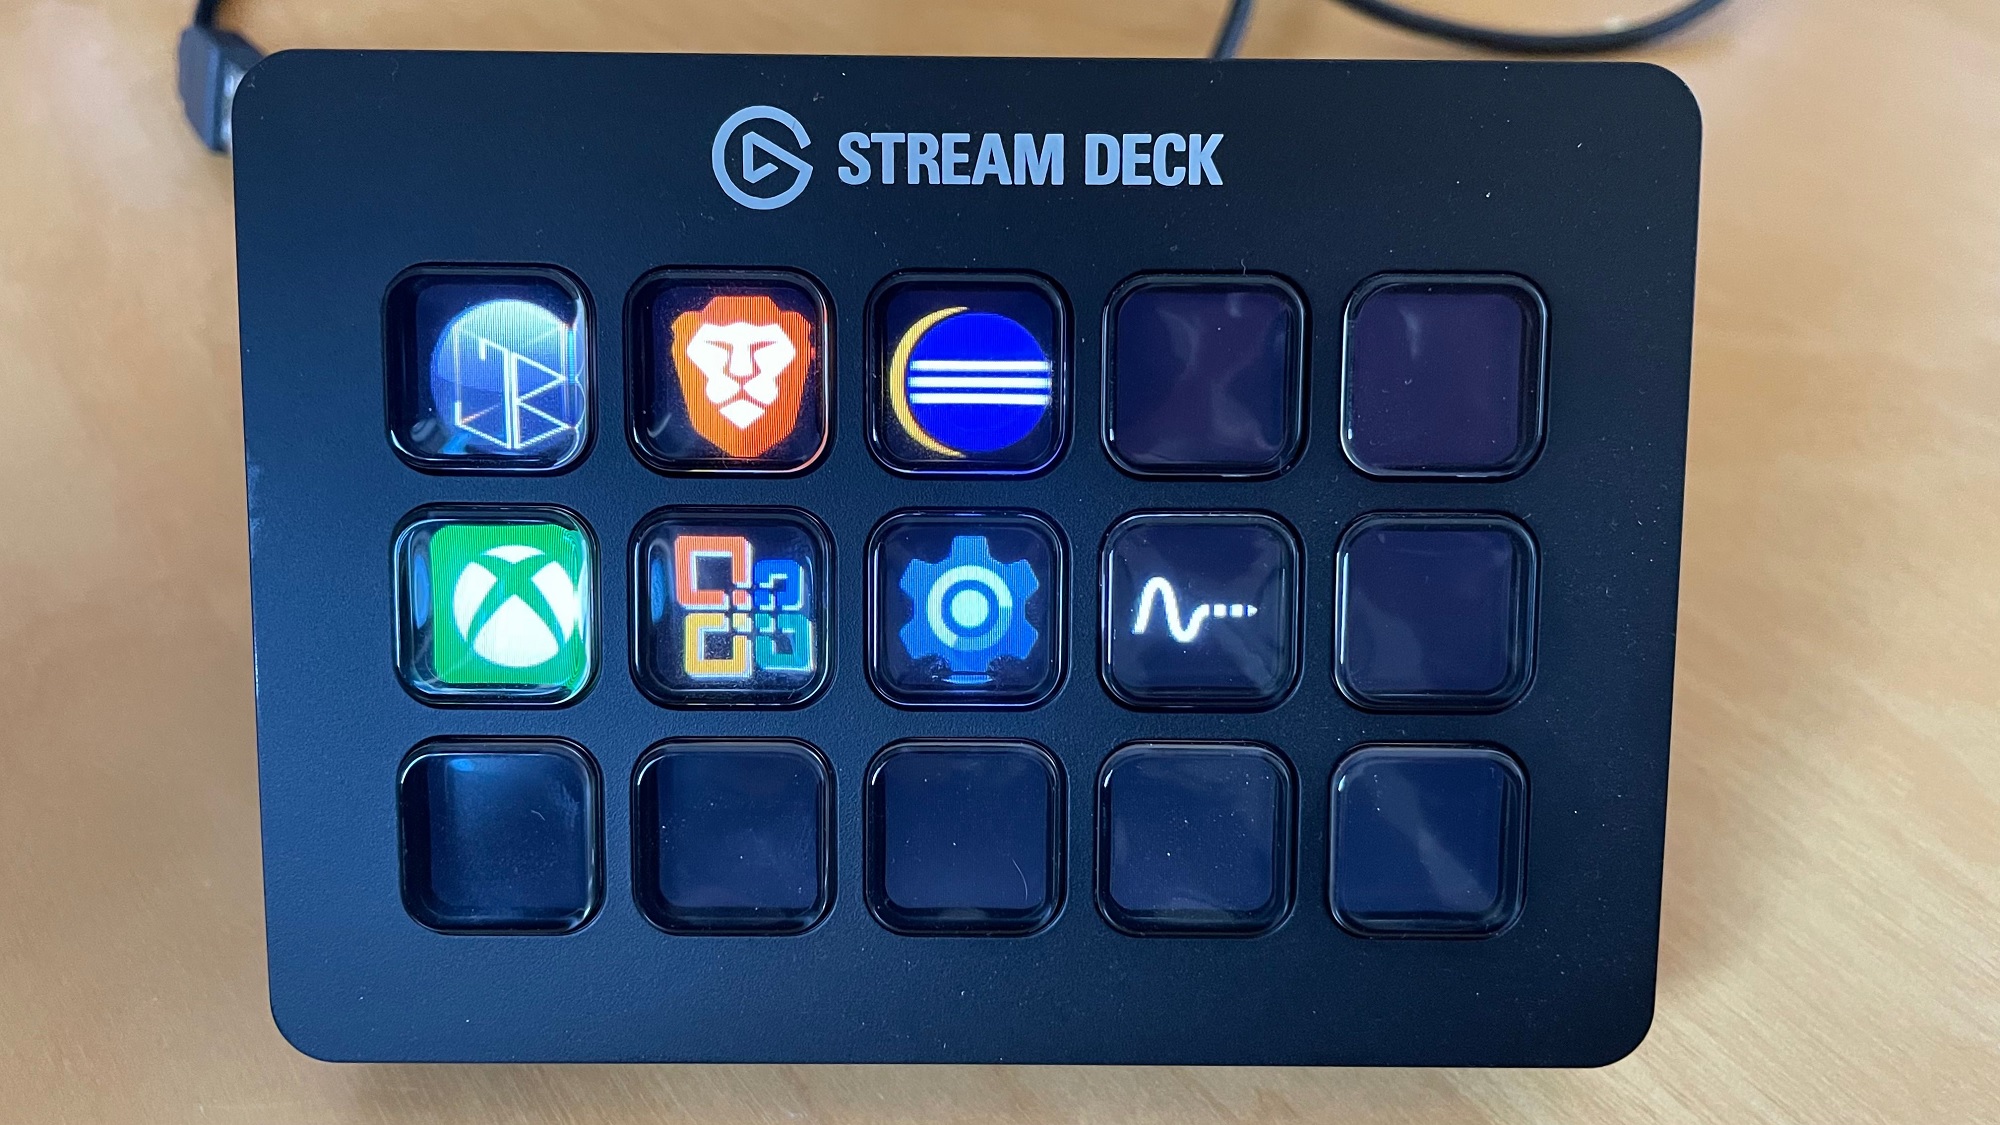 The Stream Deck MK.2 is on sale for just $130